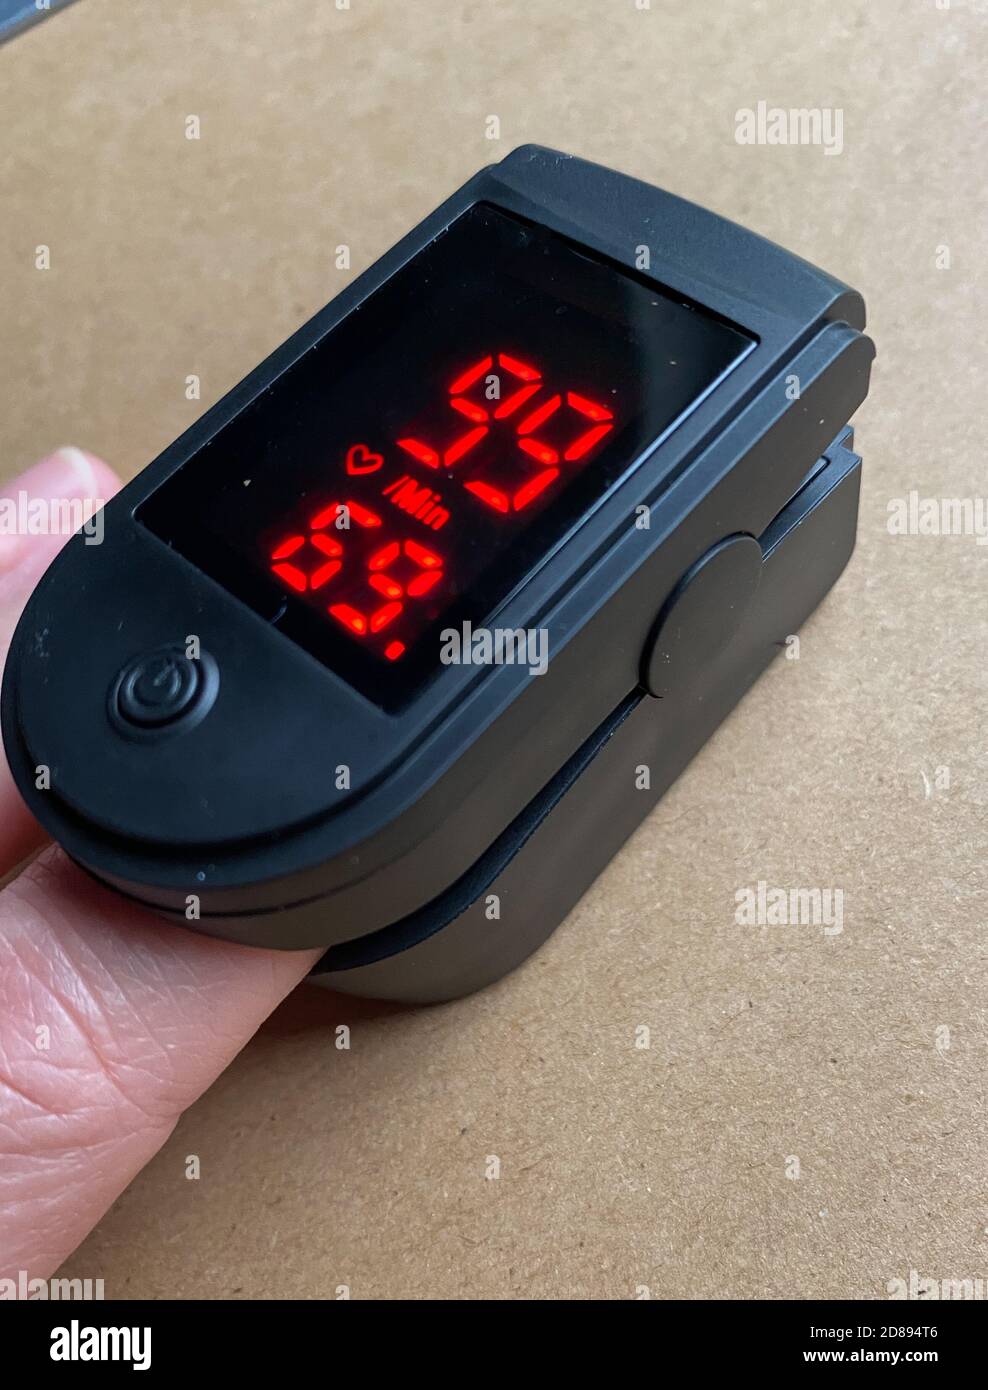 Measuring heart rate and blood oxygen saturation level using a pulse oximeter. Stock Photo